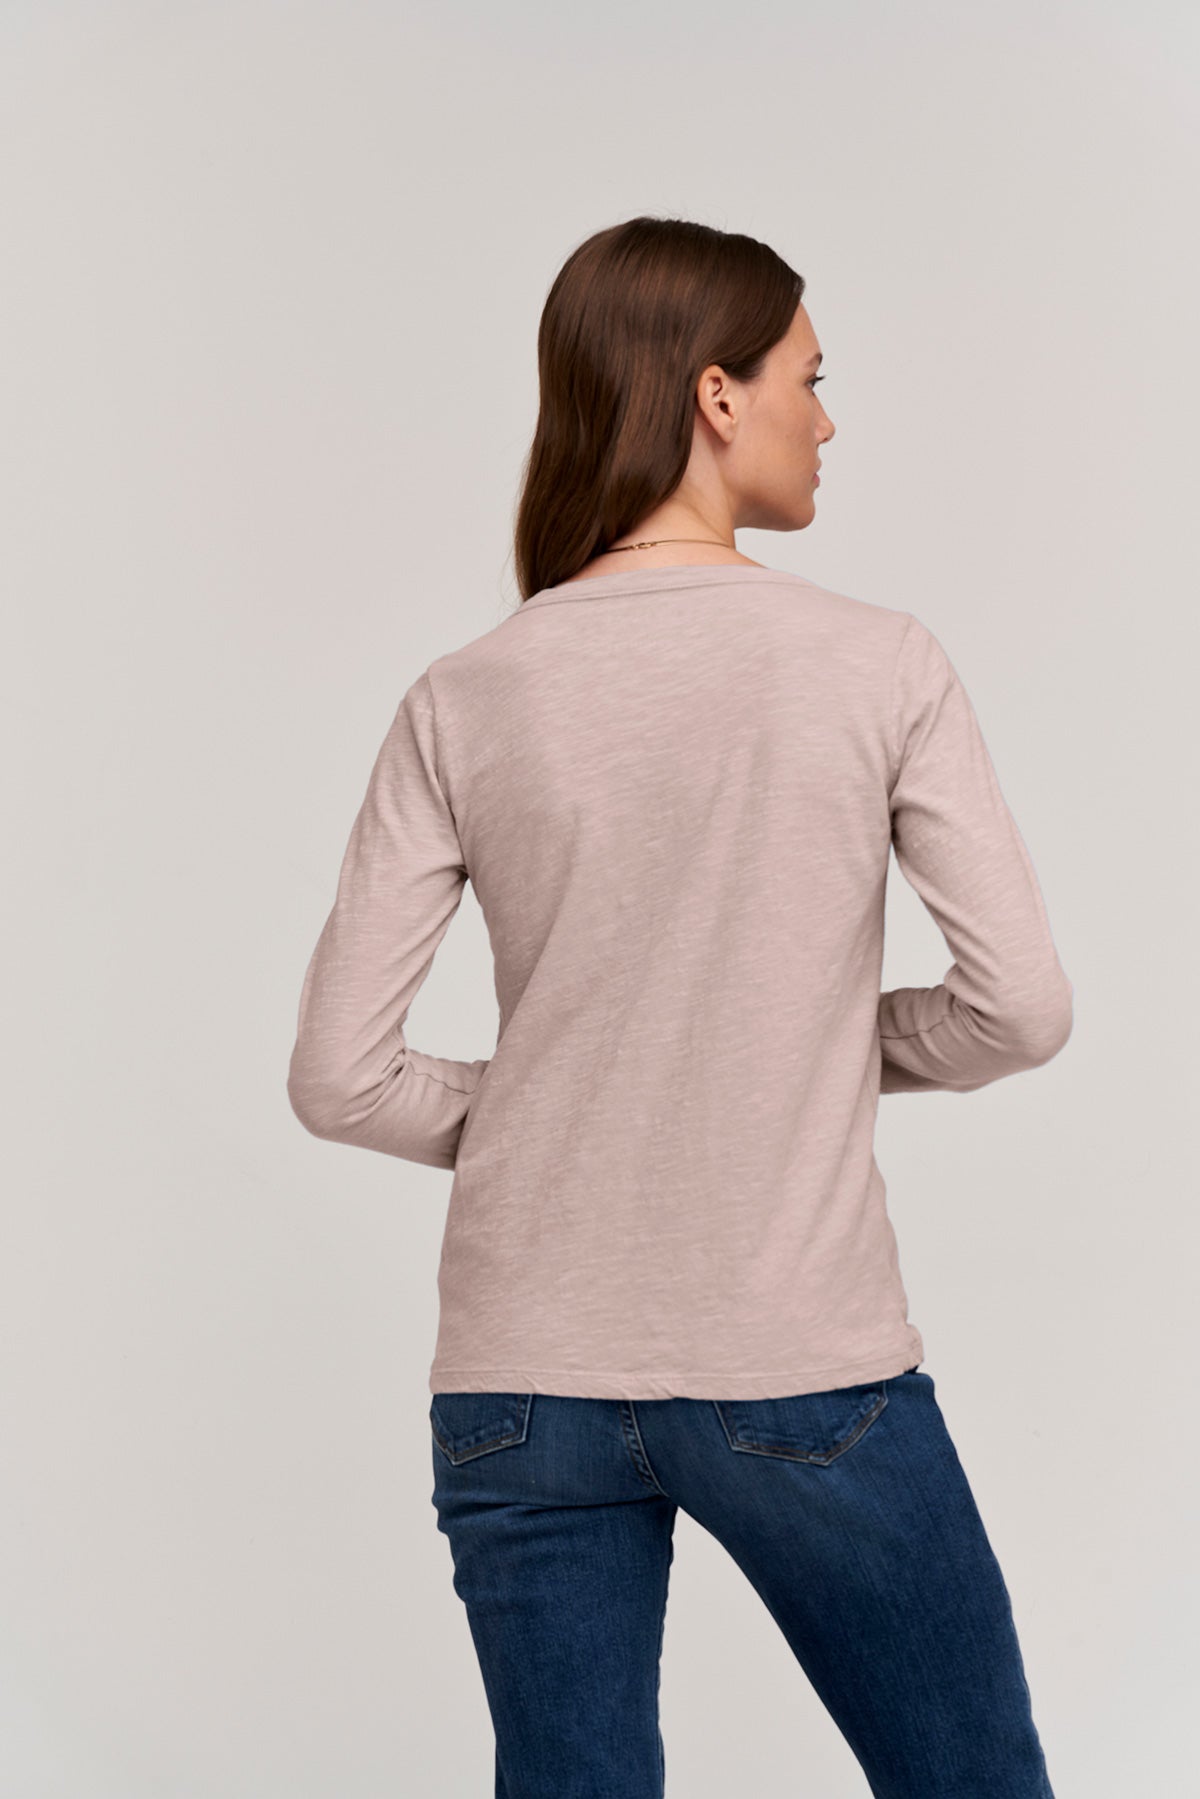   Lizzie Long Sleeve Tee in Rosegold exclusive back view 